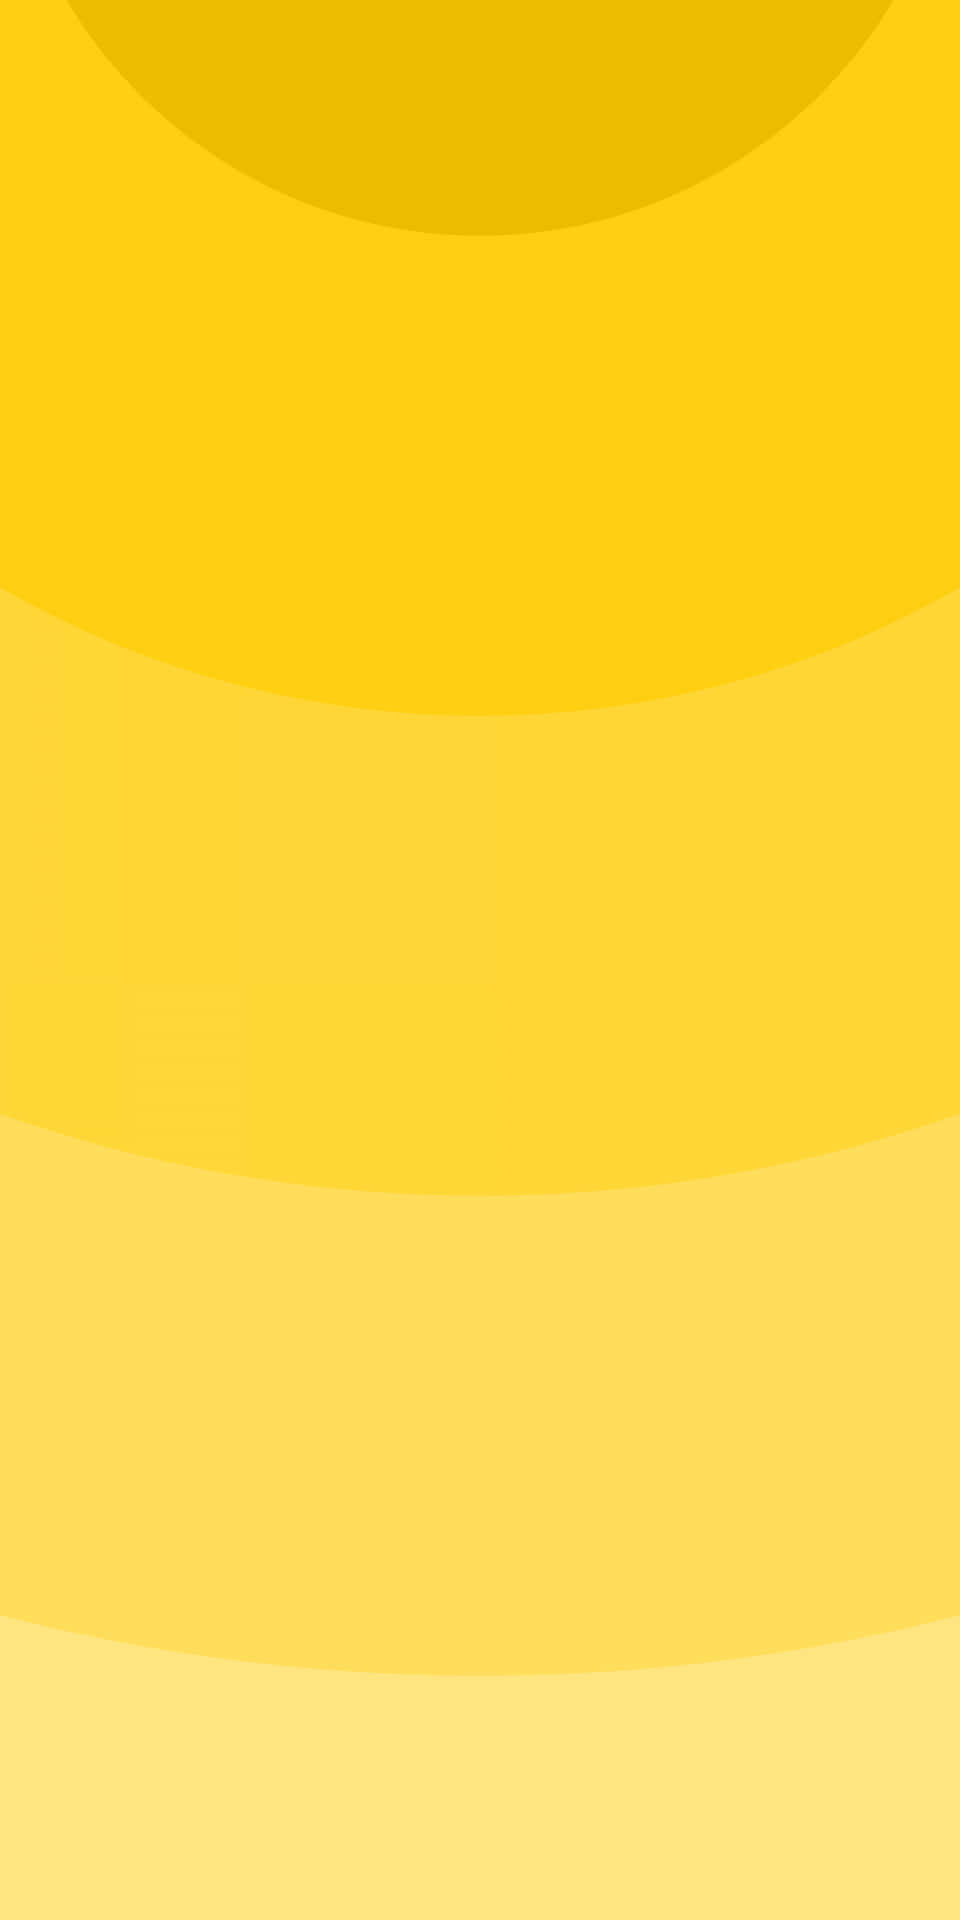 A Yellow Background With A Yellow Sun